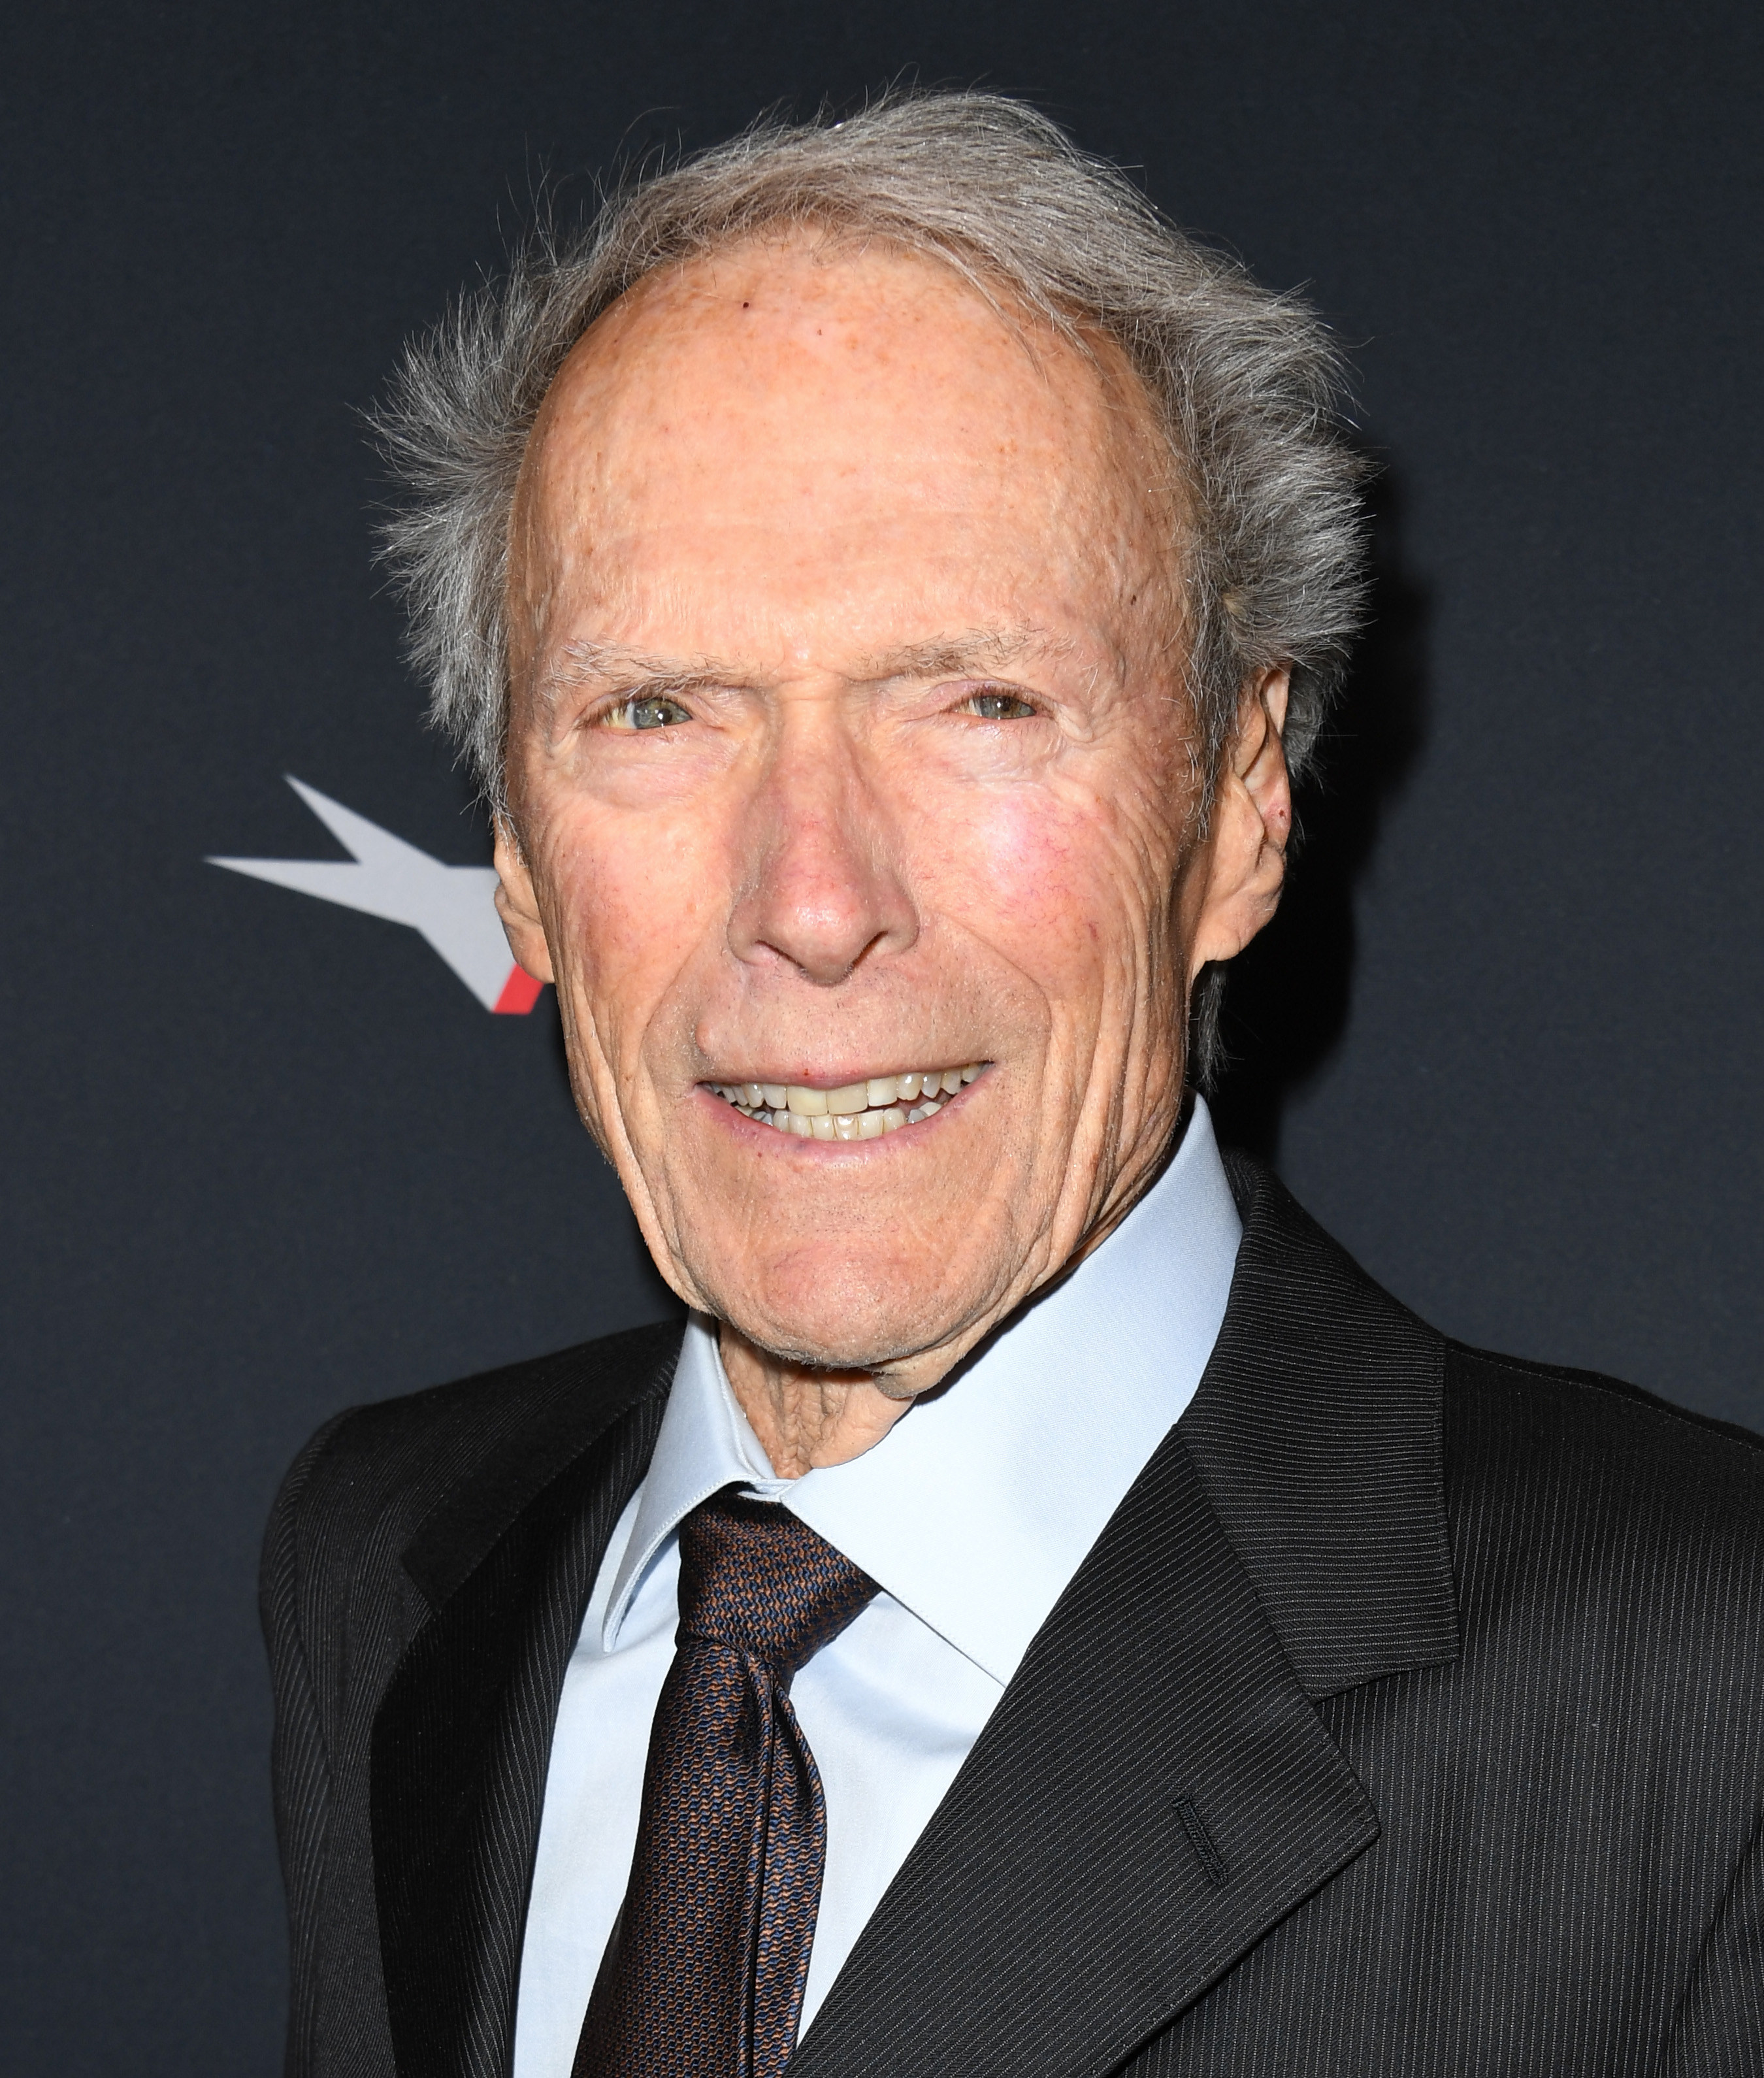 Clint Eastwood at the 20th Annual AFI Awards